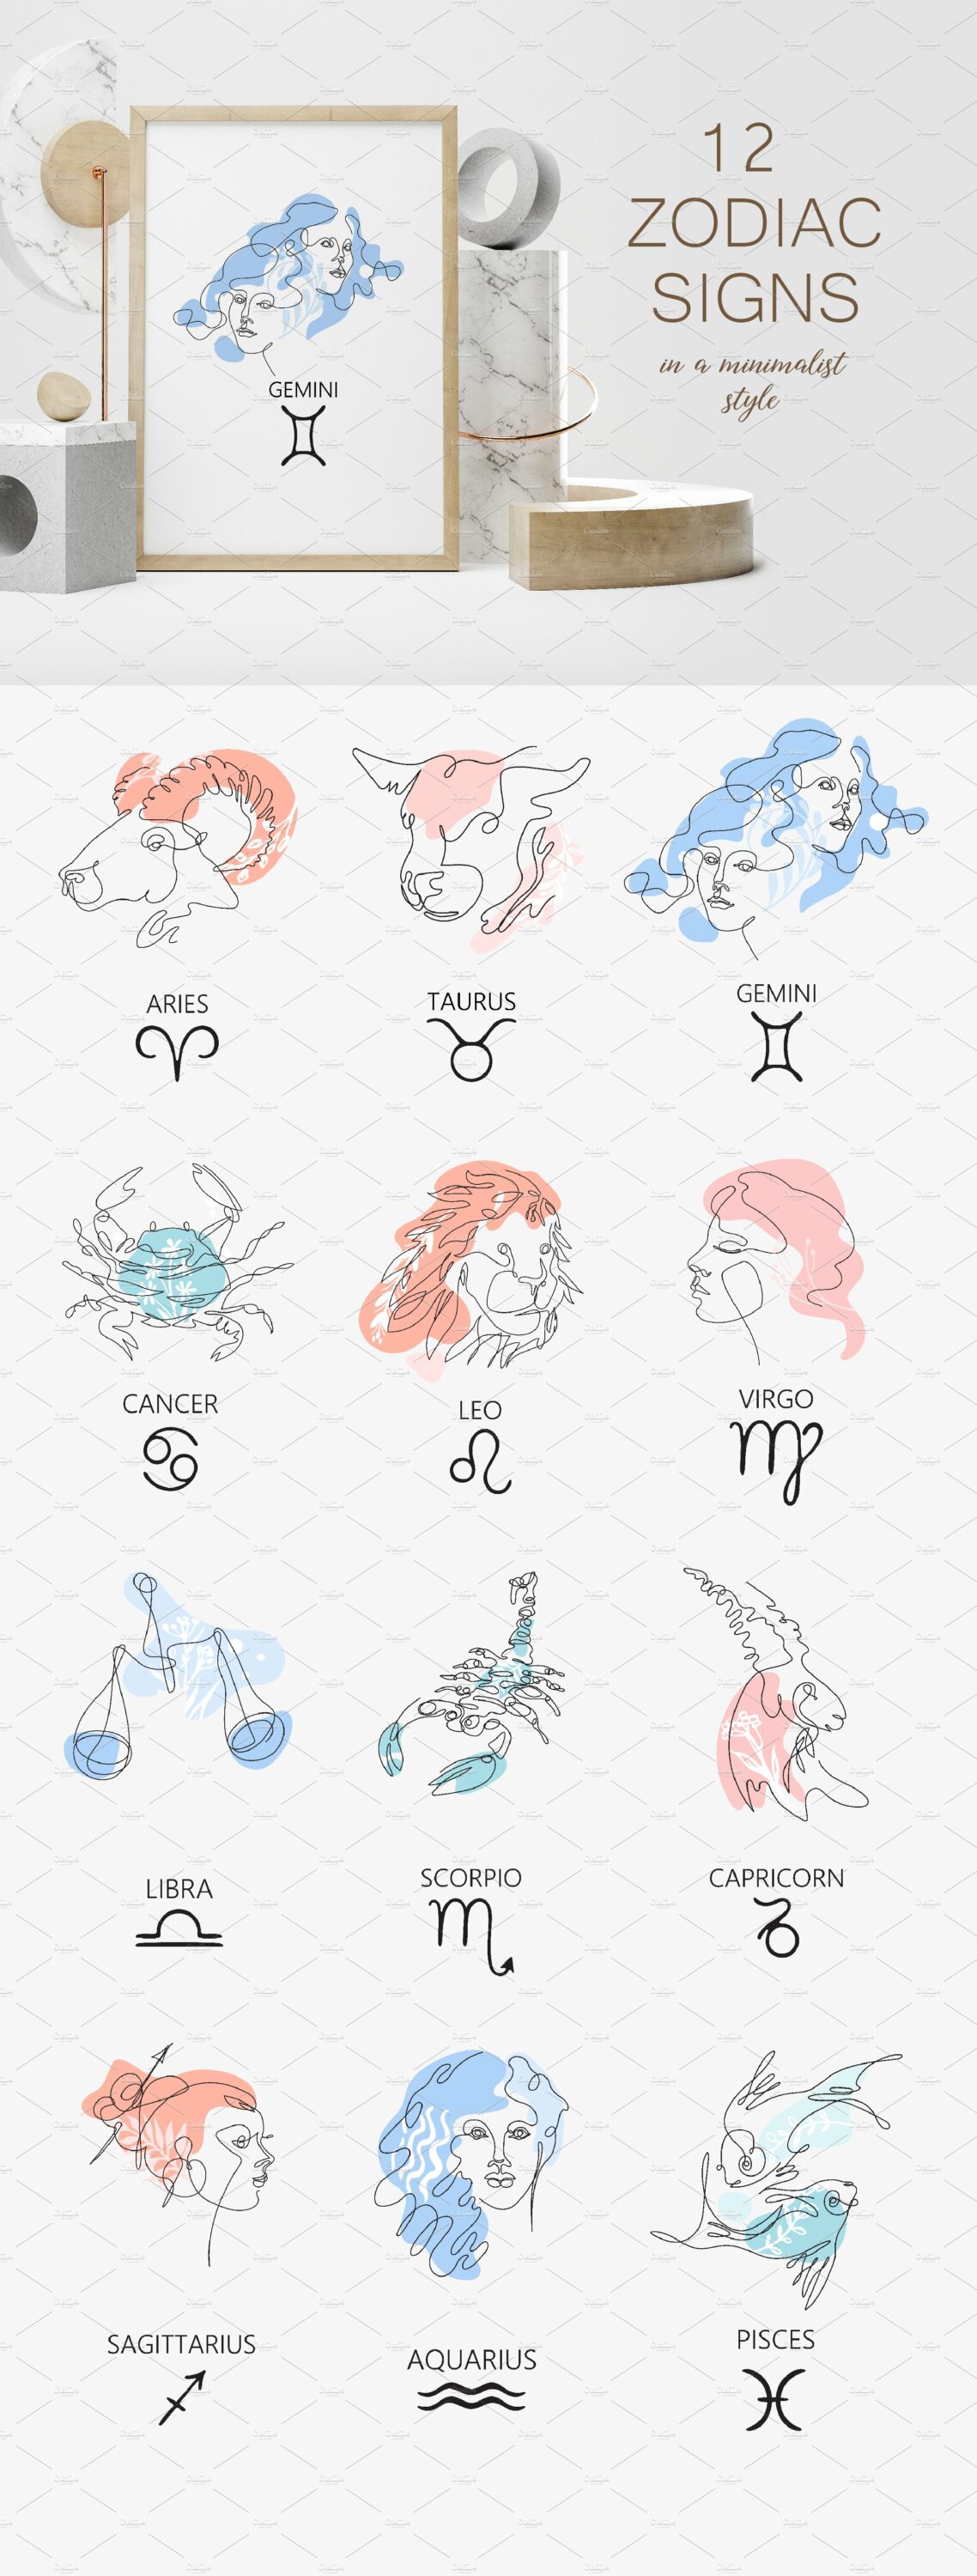 Some zodiac signs for the different purposes.